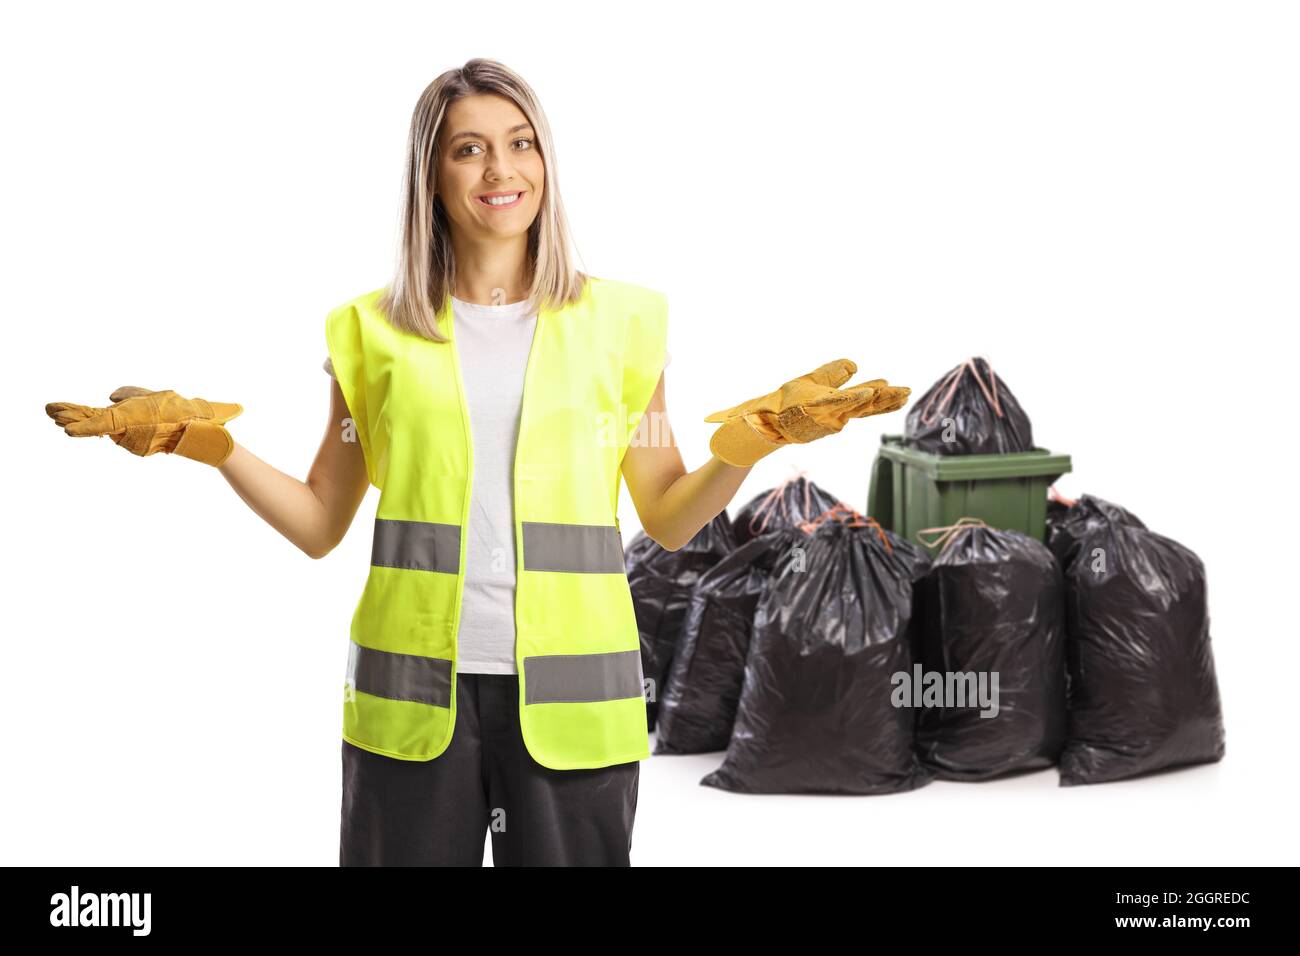 Female waste collector posing with bins and bags isolated on white background Stock Photo